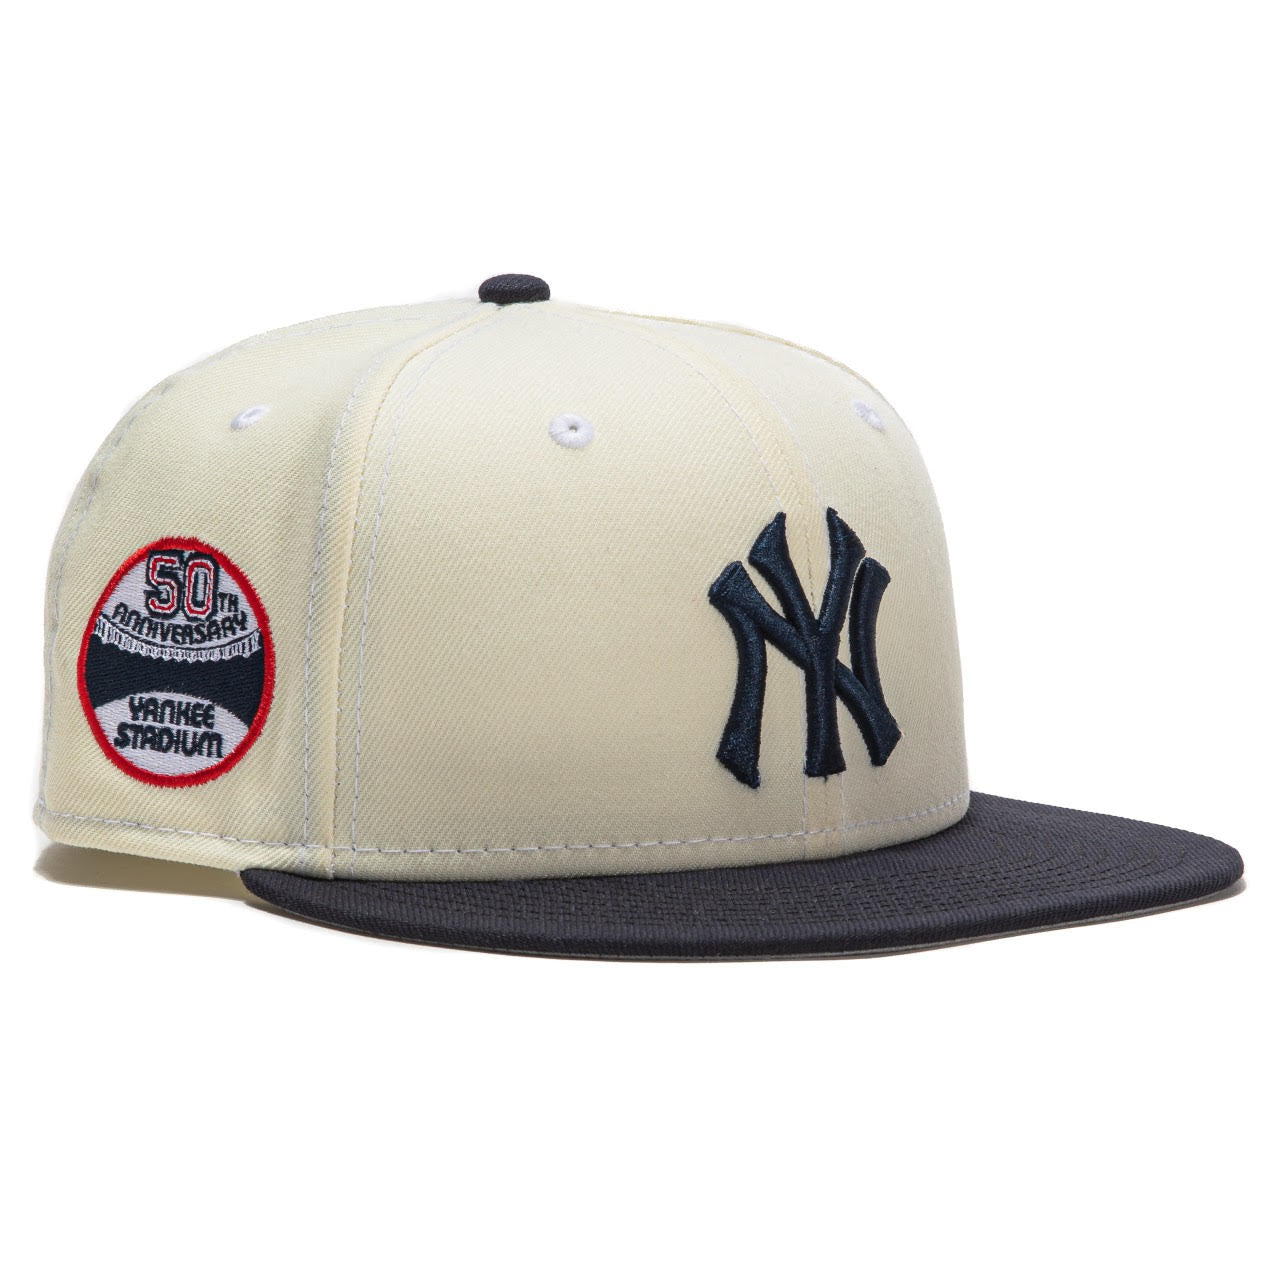 New Era Exclusive 59th White Dome New York Yankees 50th Anniversary Patch Hat